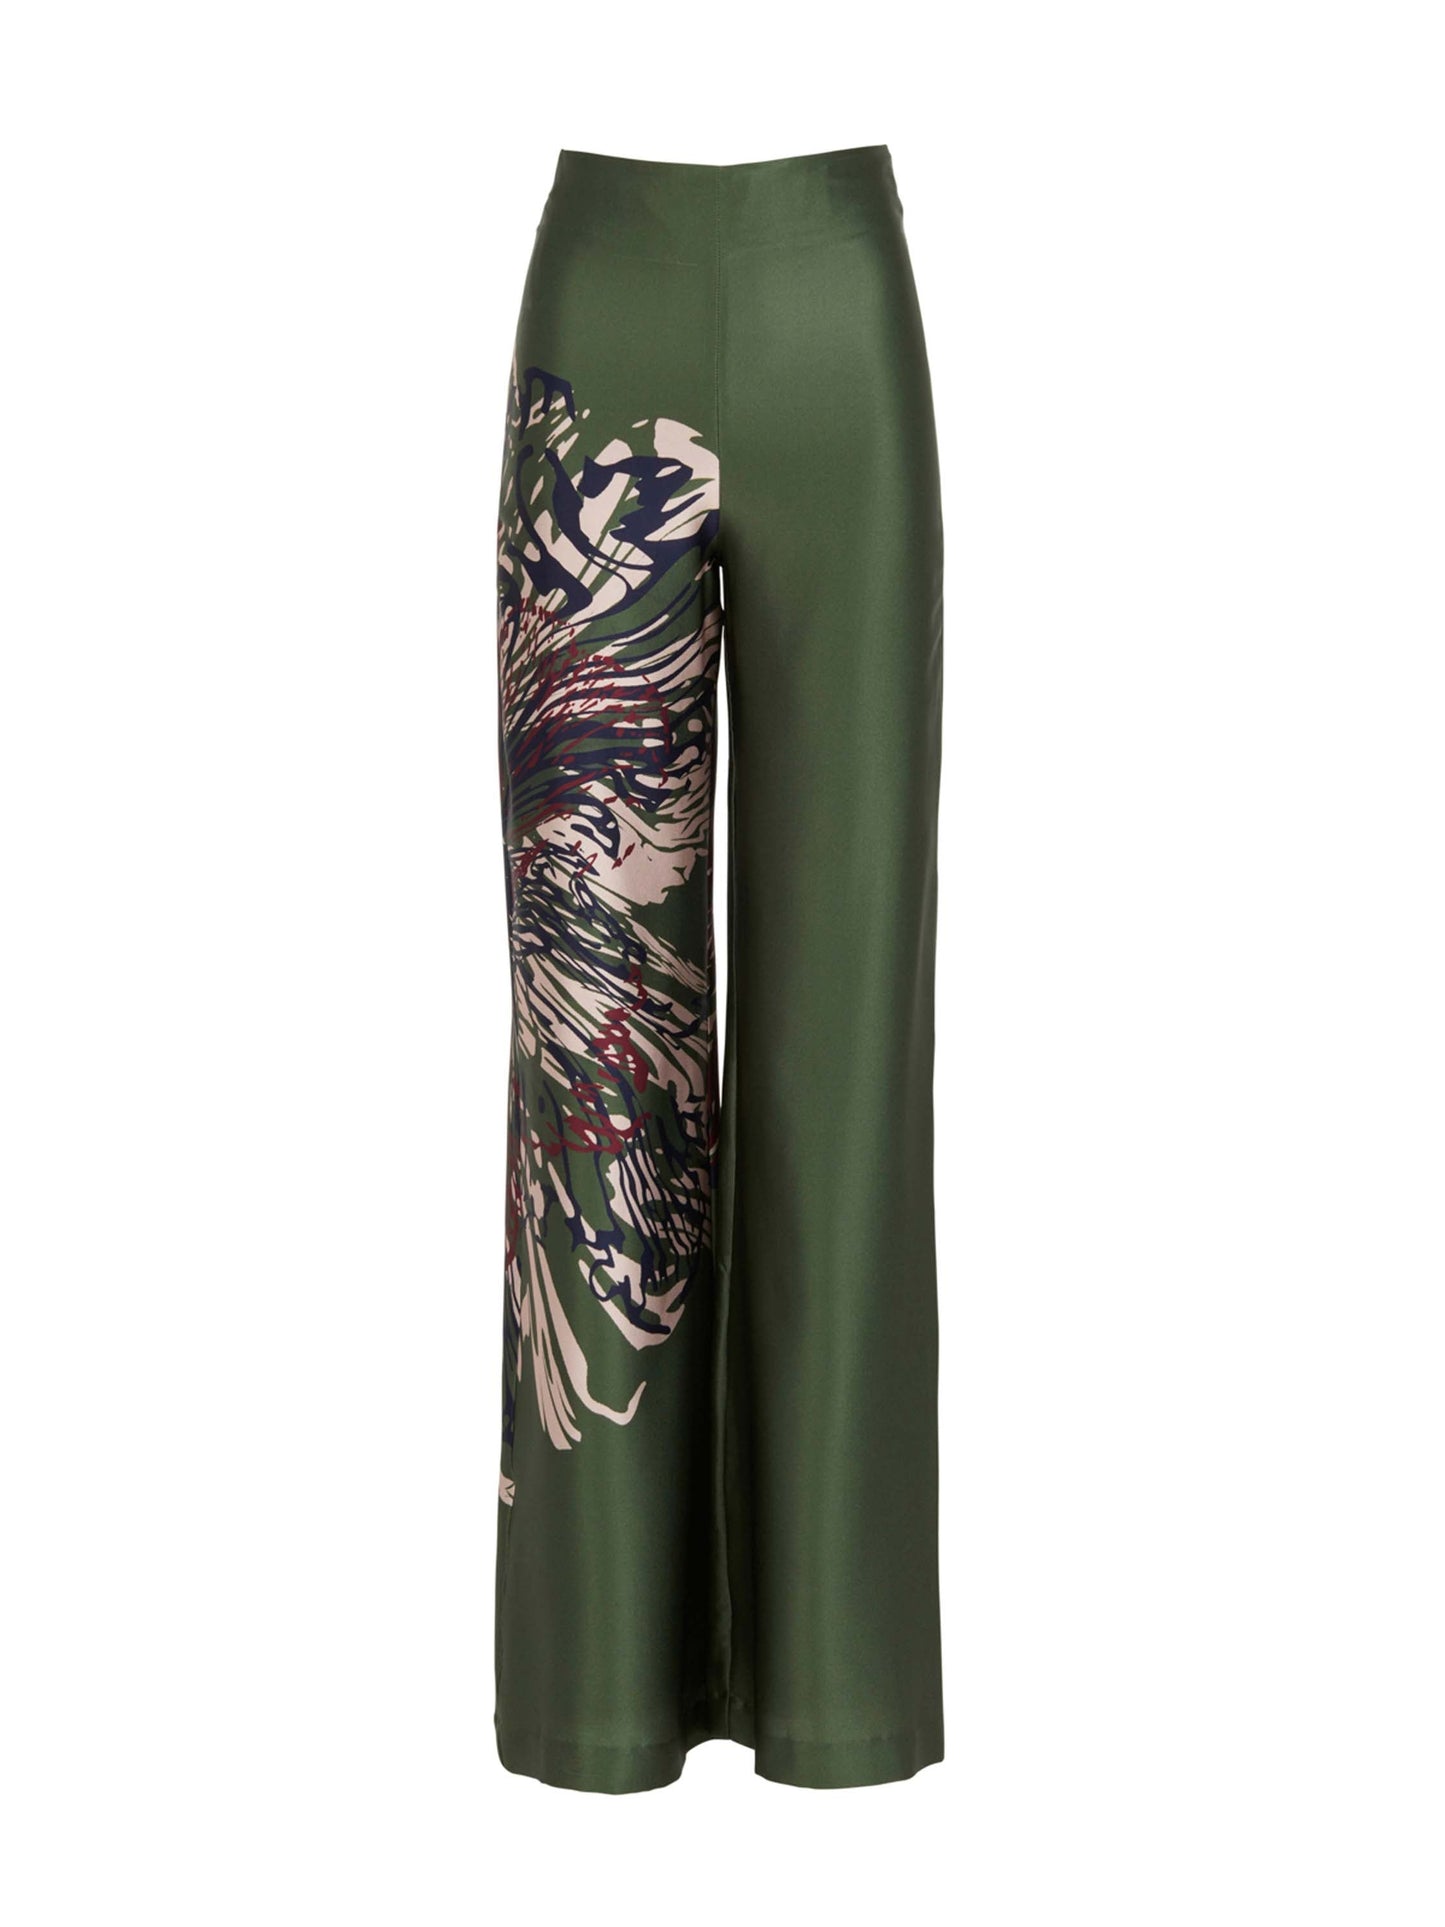 A Como Pant Green Floral, perfect for figure-flattery.